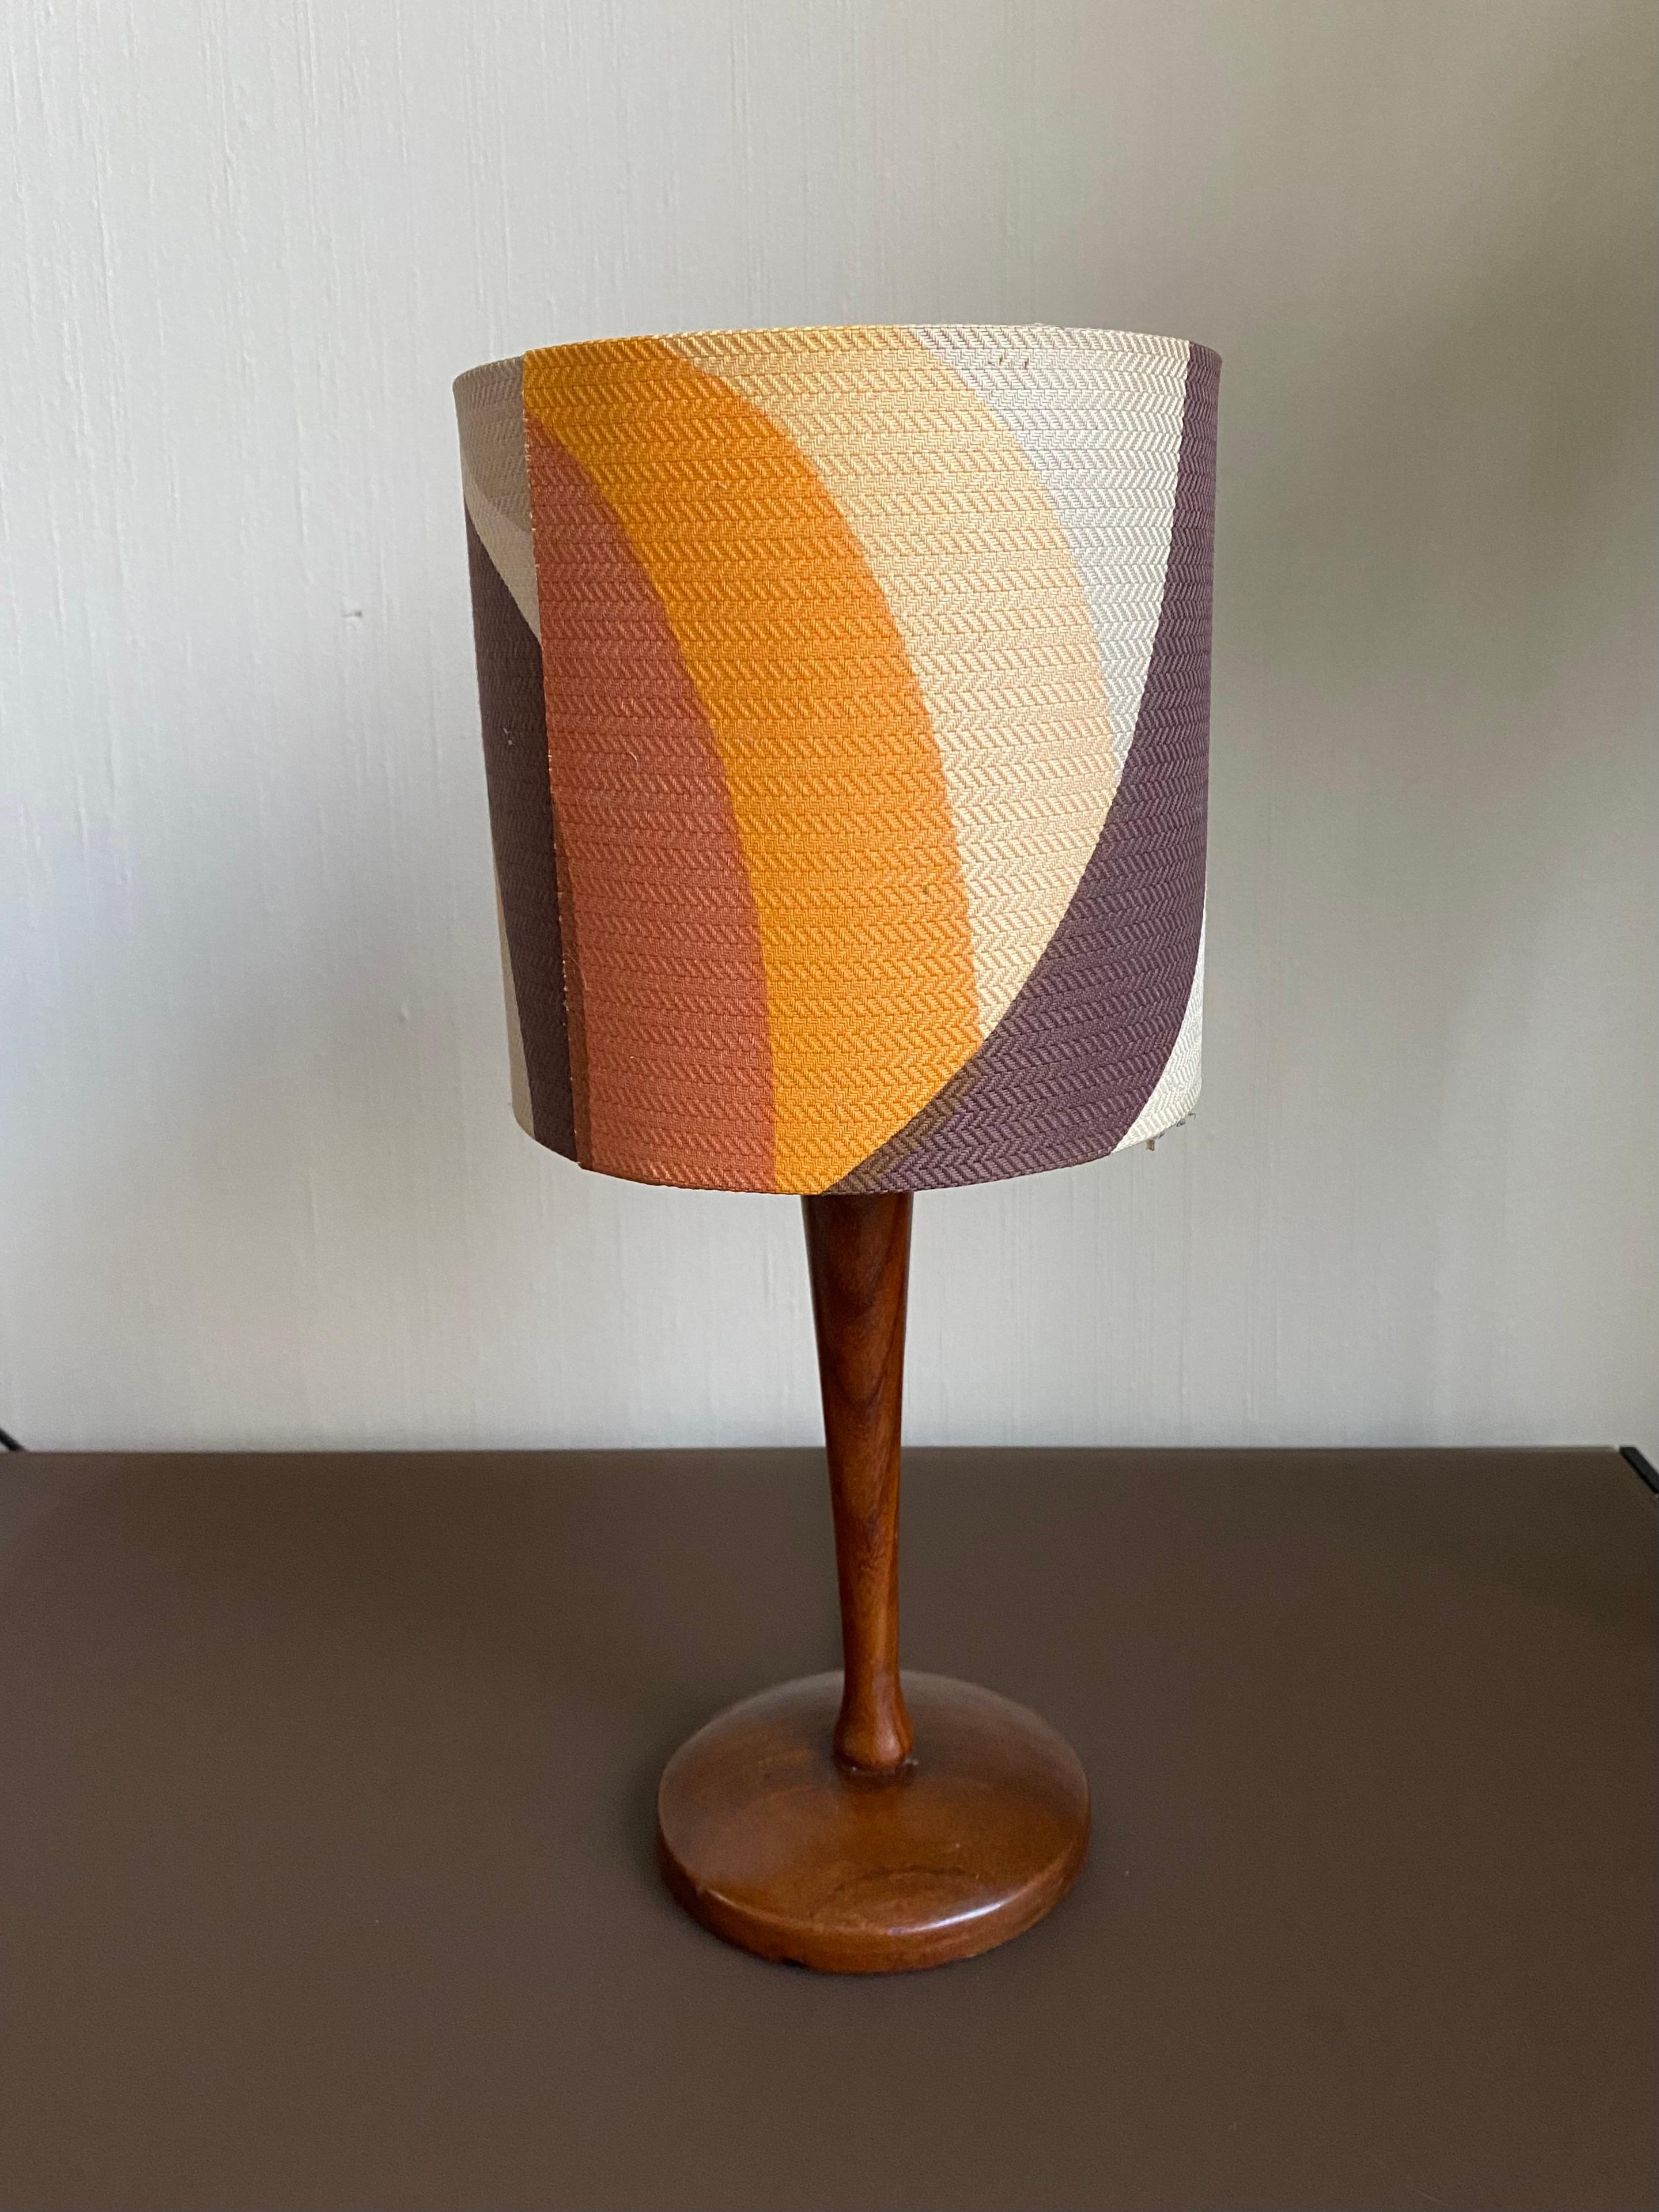 Gorgeous Elegant Table Lamp with beautiful warm colored shade and very nice teak base. The piece remains in very good condition for it’s age and show’s slight wear to the shade. Original wiring.